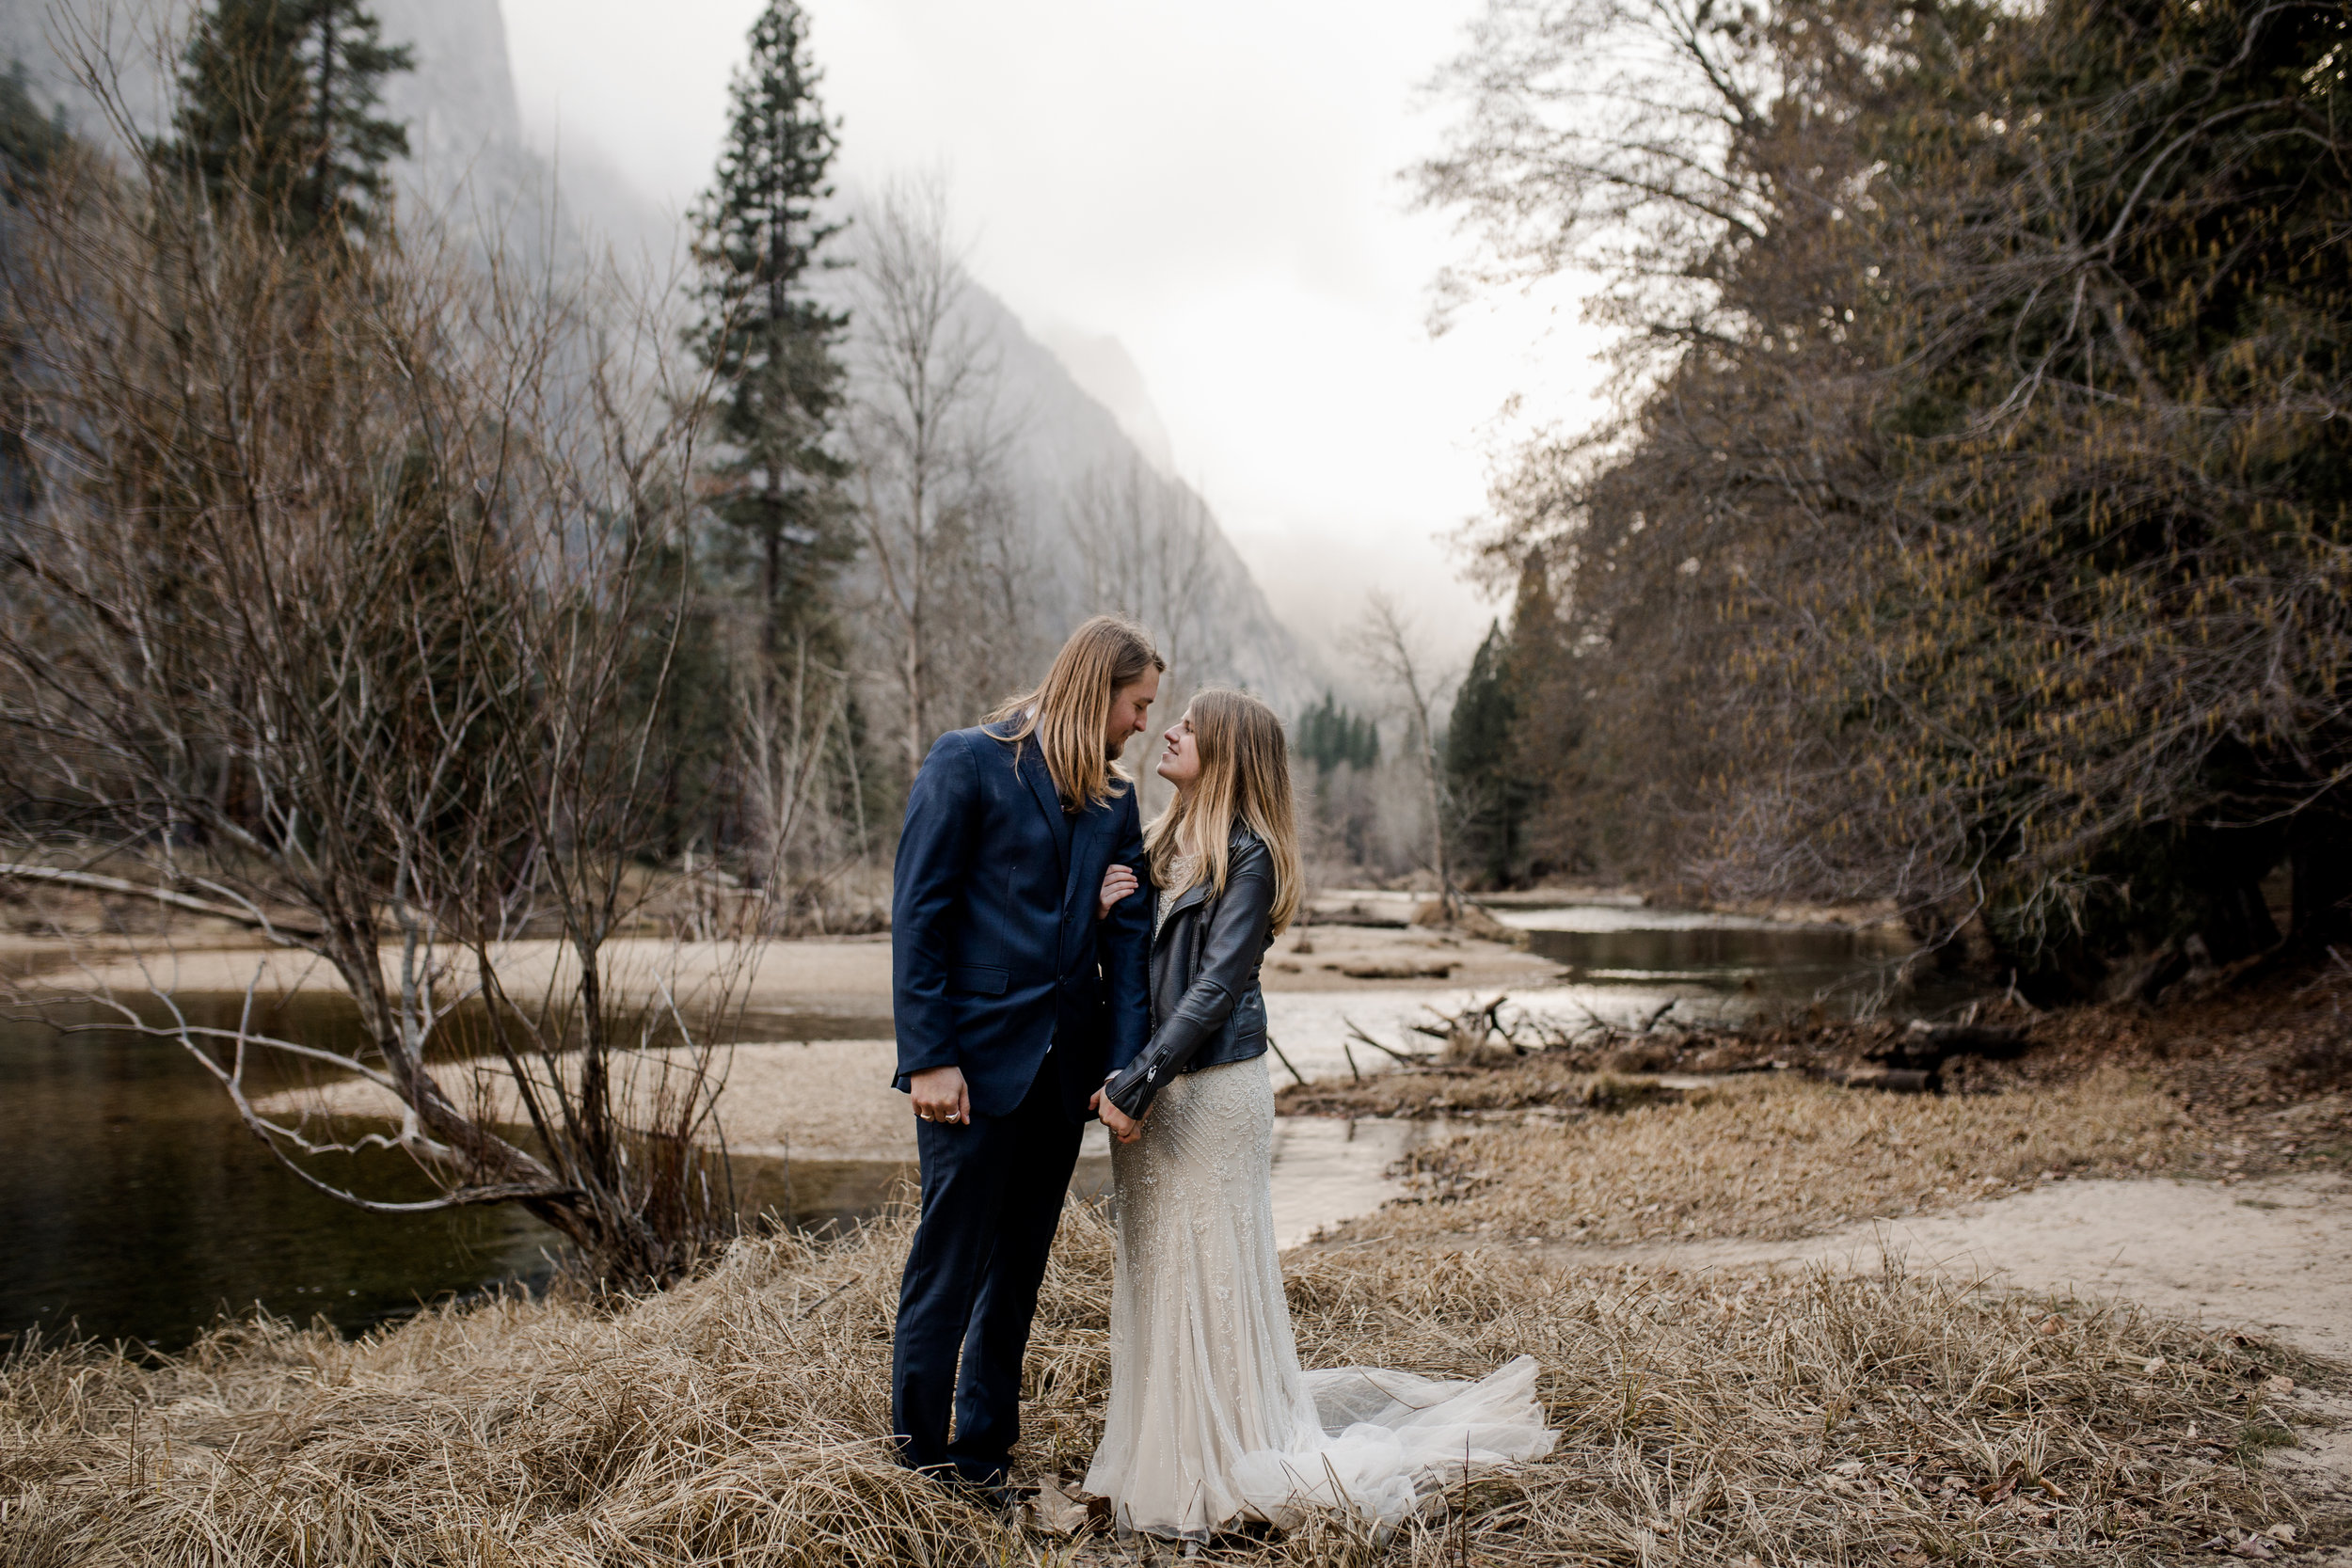 nicole-daacke-photography-yousemite-national-park-elopement-photographer-winter-cloud-moody-elope-inspiration-yosemite-valley-tunnel-view-winter-cloud-fog-weather-wedding-photos-46.jpg